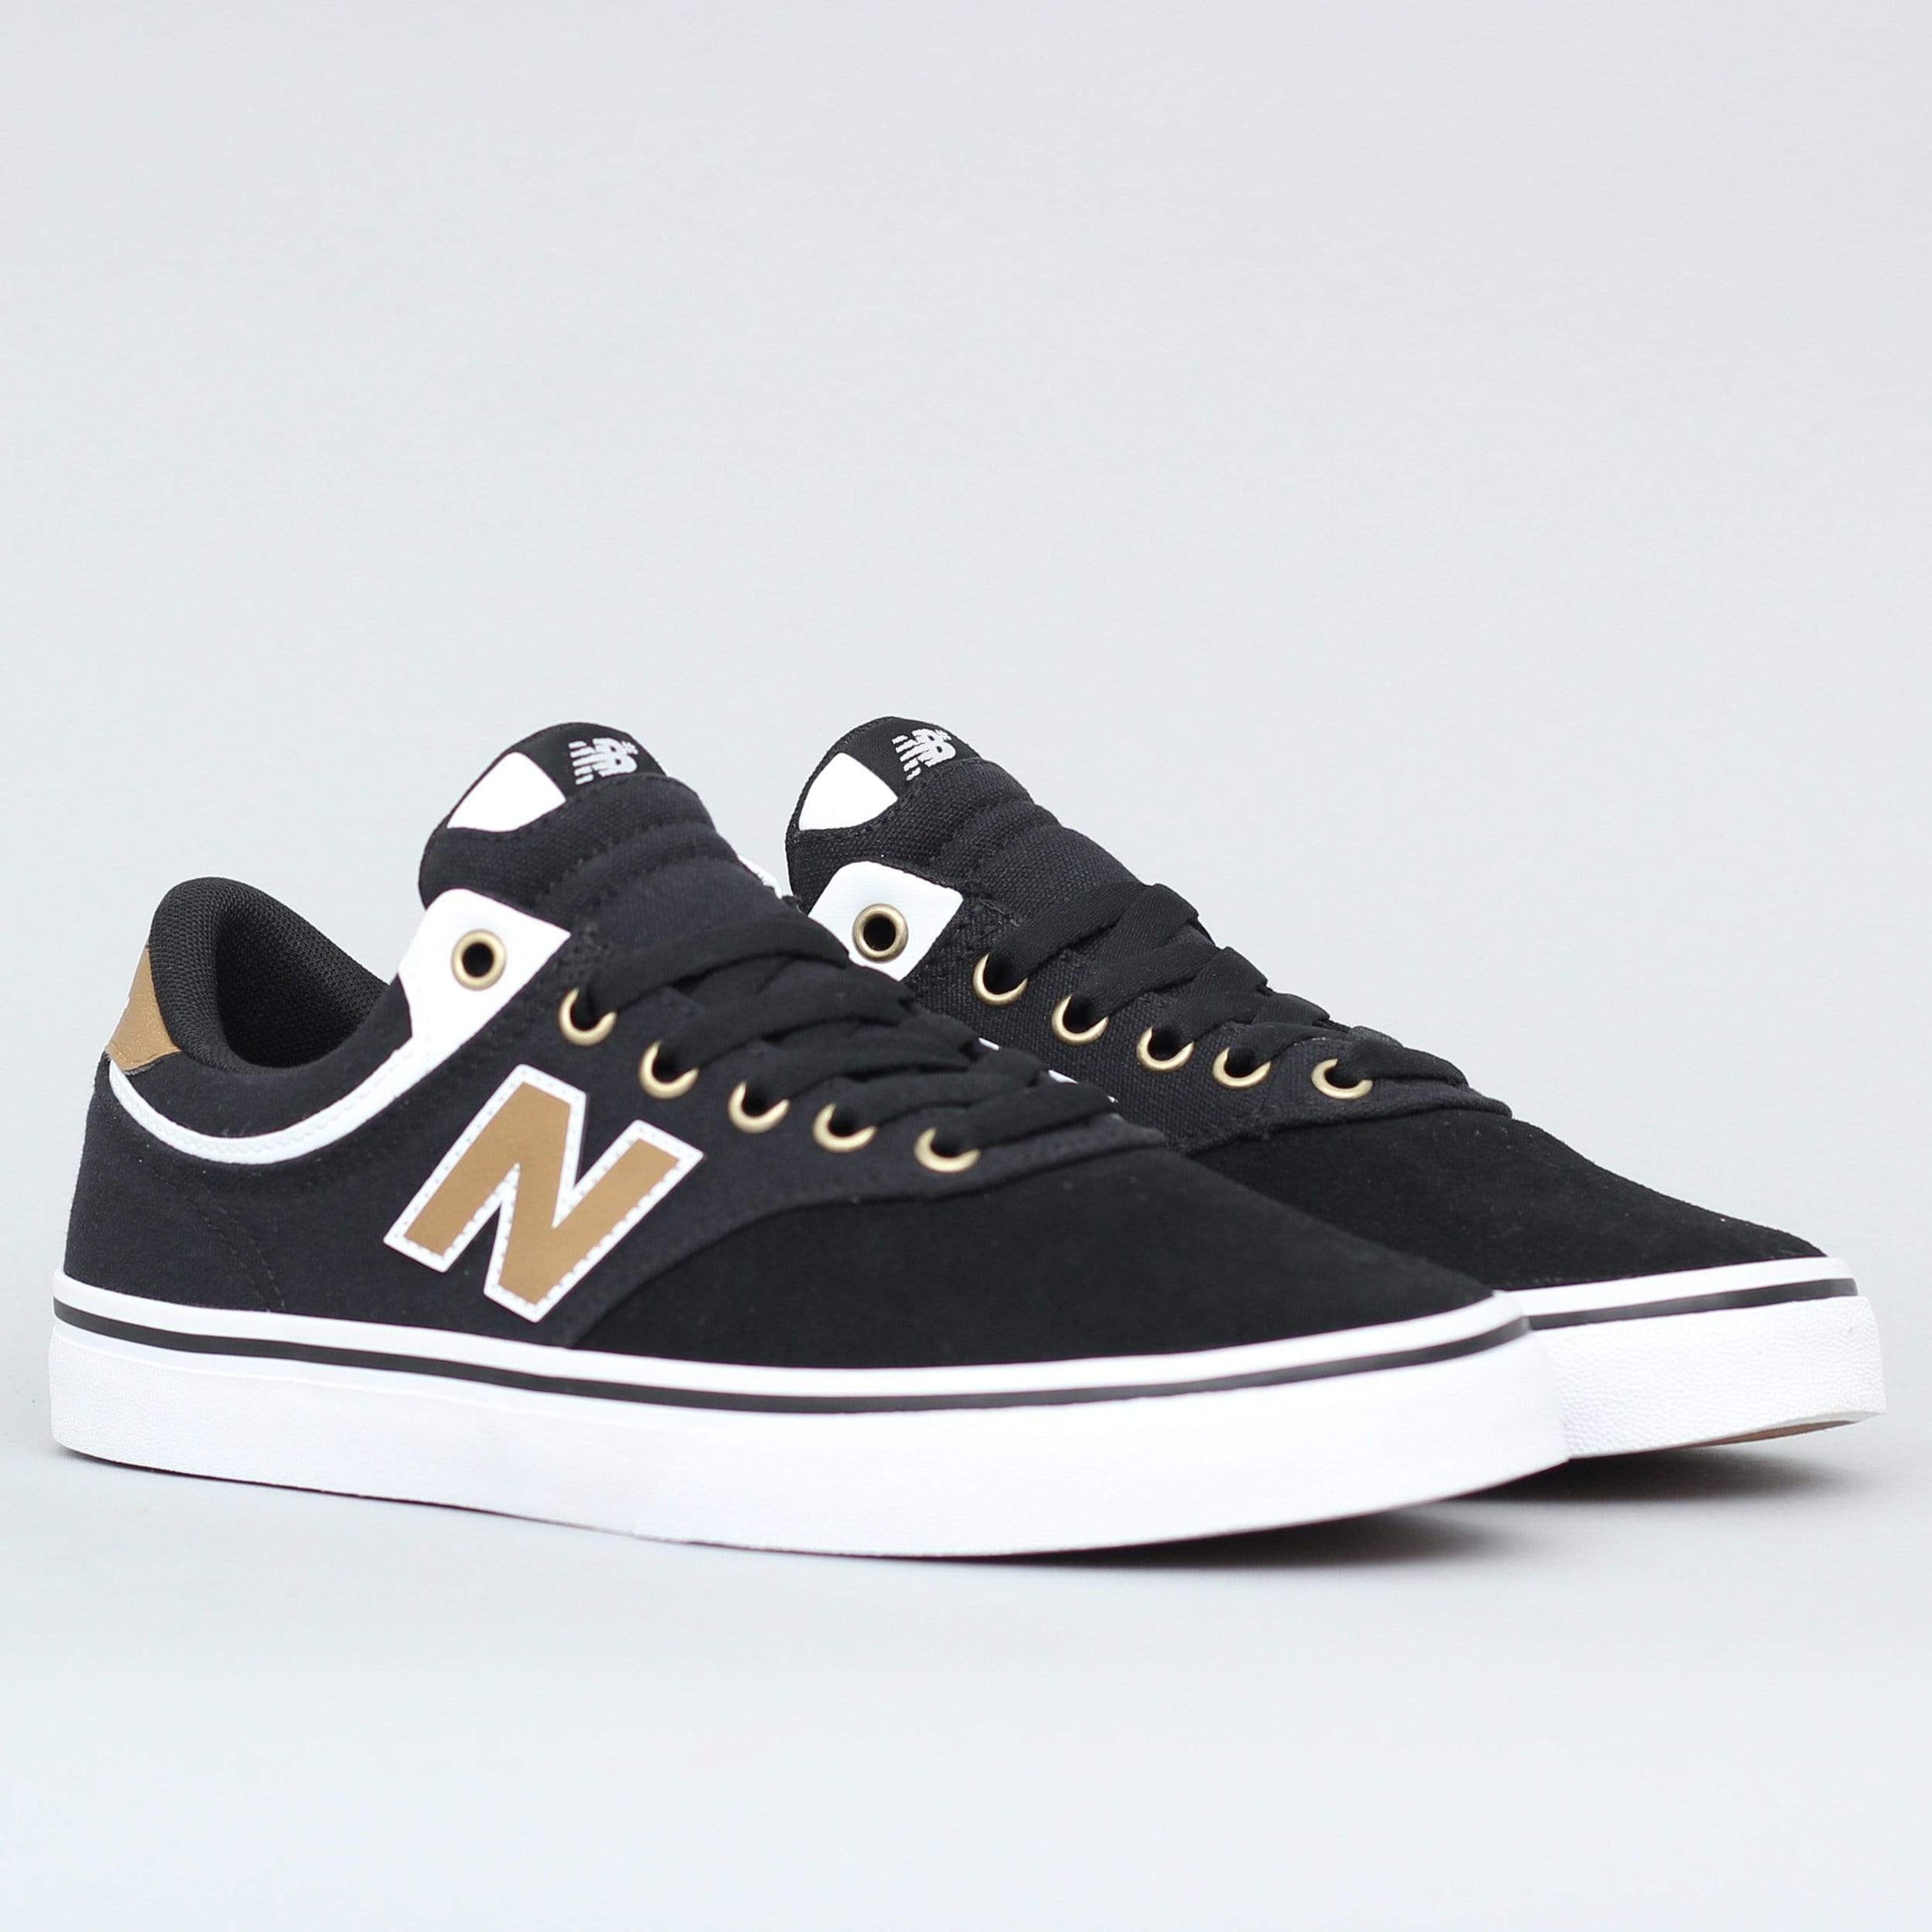 New Balance Numeric 255 Shoes Black / Brown